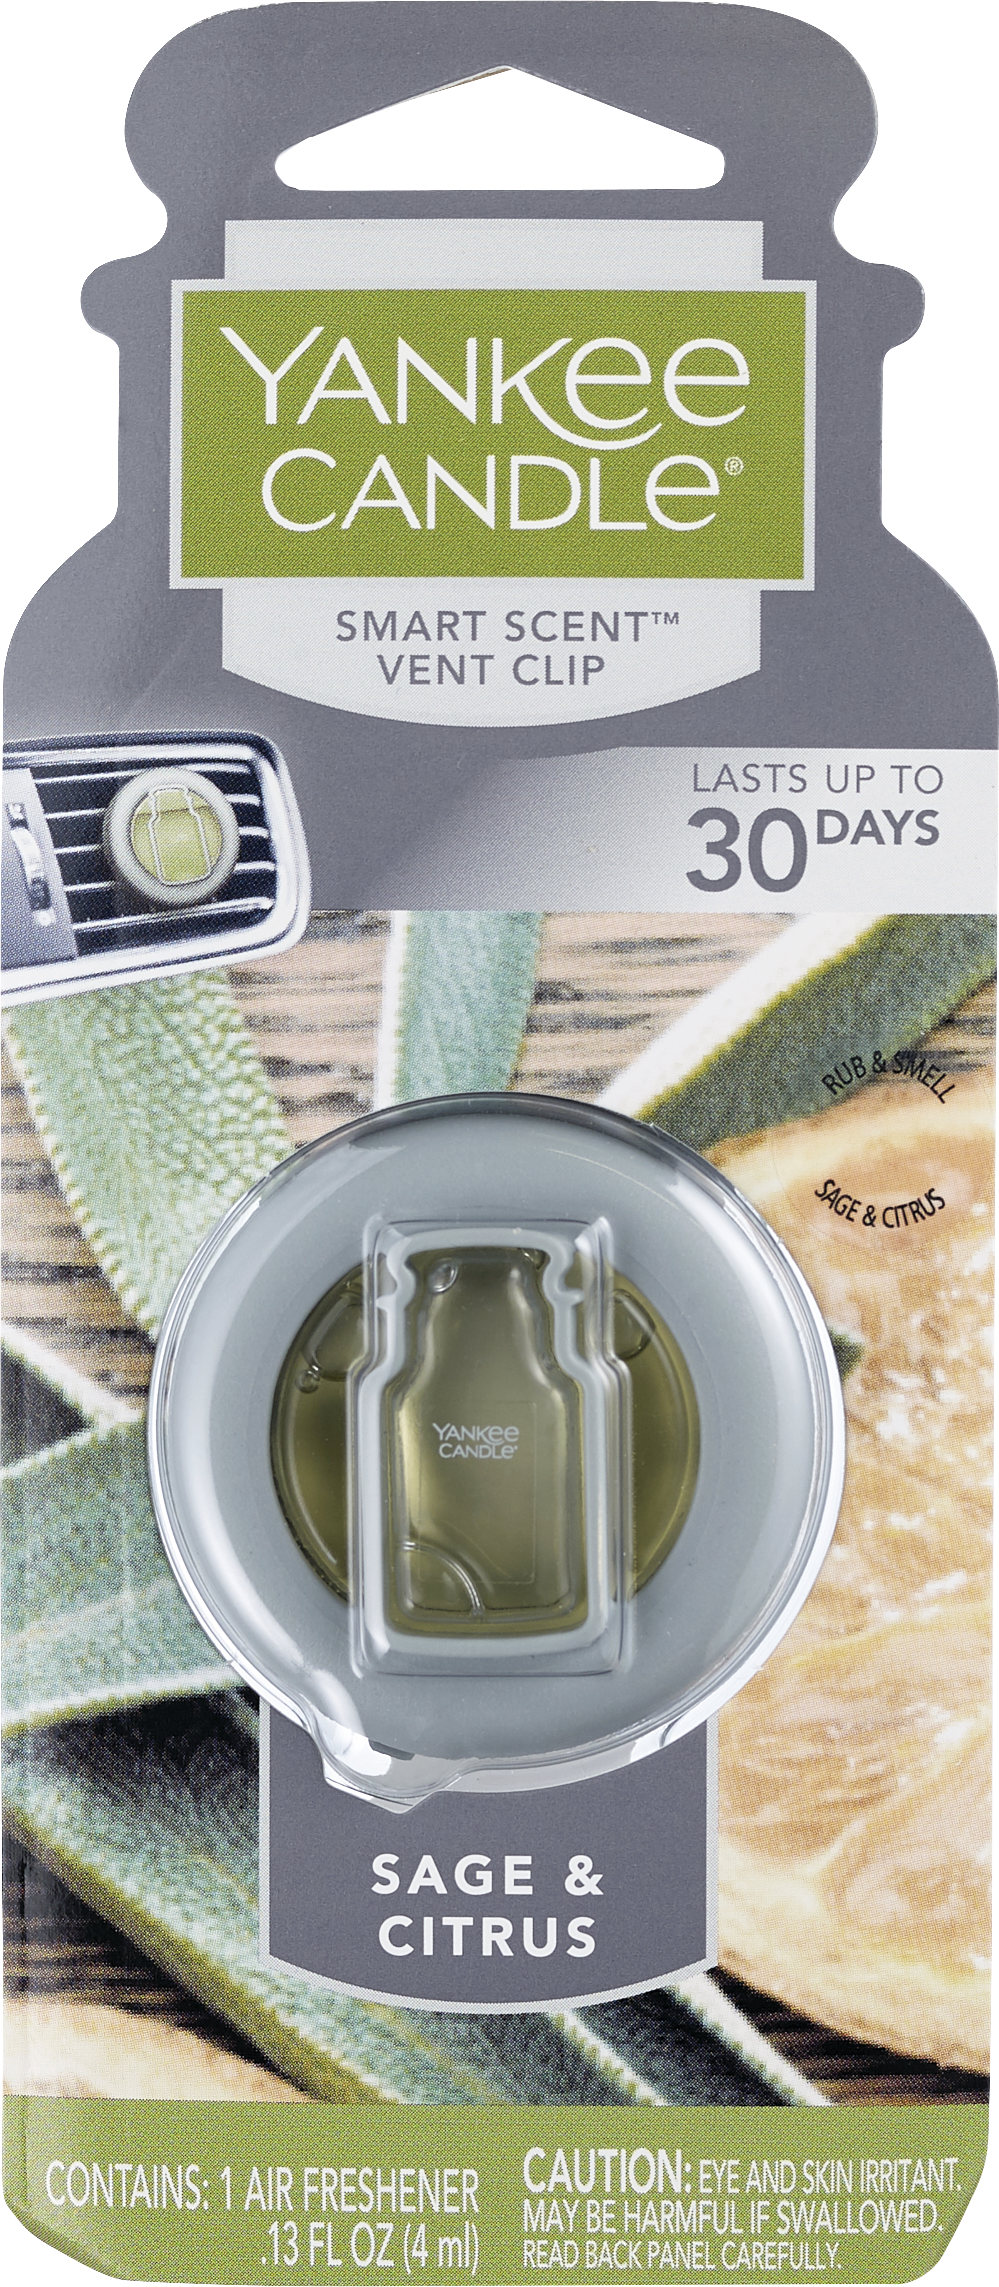 Yankee Candle Smart Scent Vent Clip Air Freshener